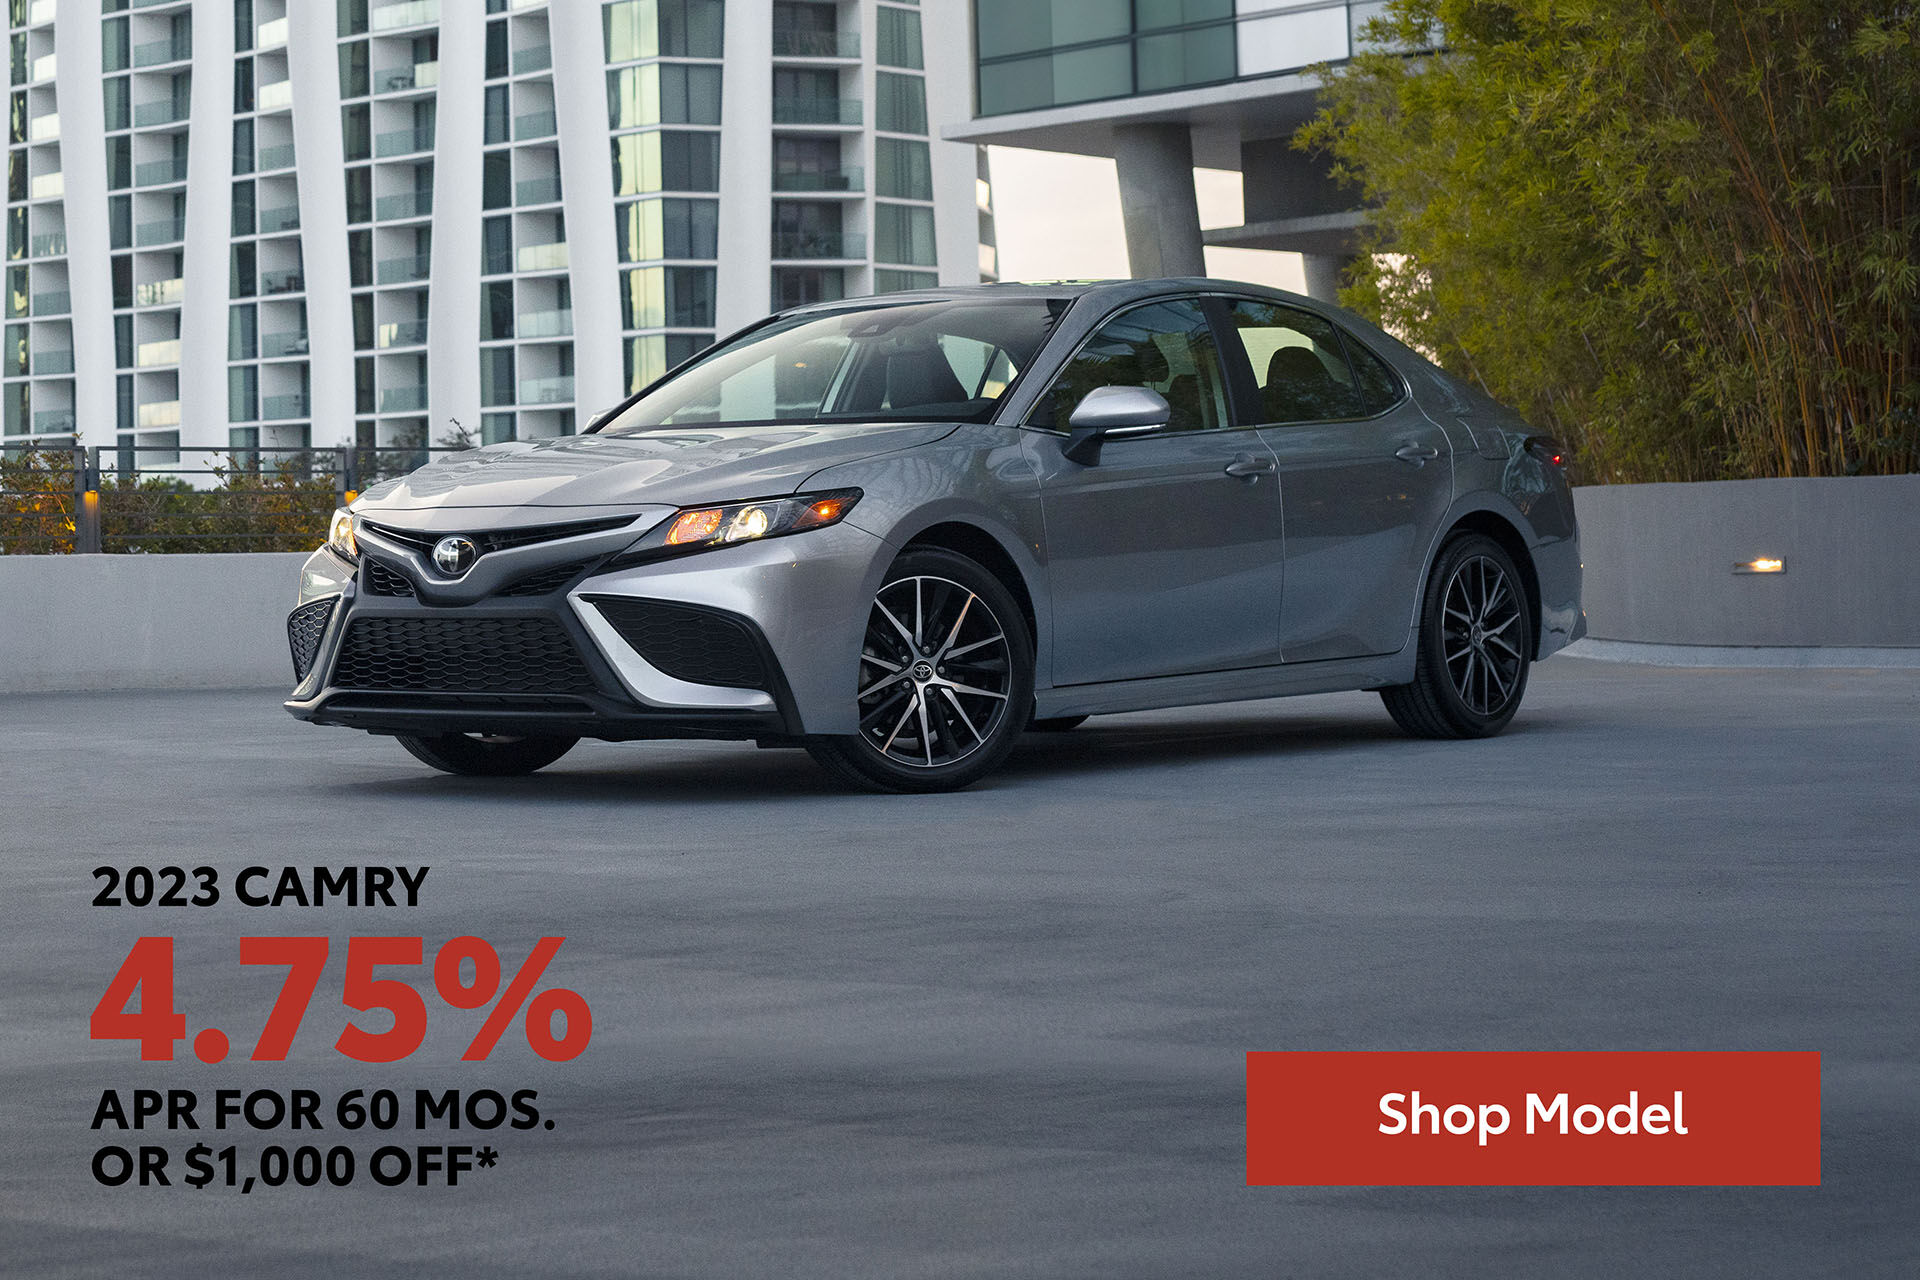 2023 Camry: 4.75% APR For 60 Months Or $1,000 Off